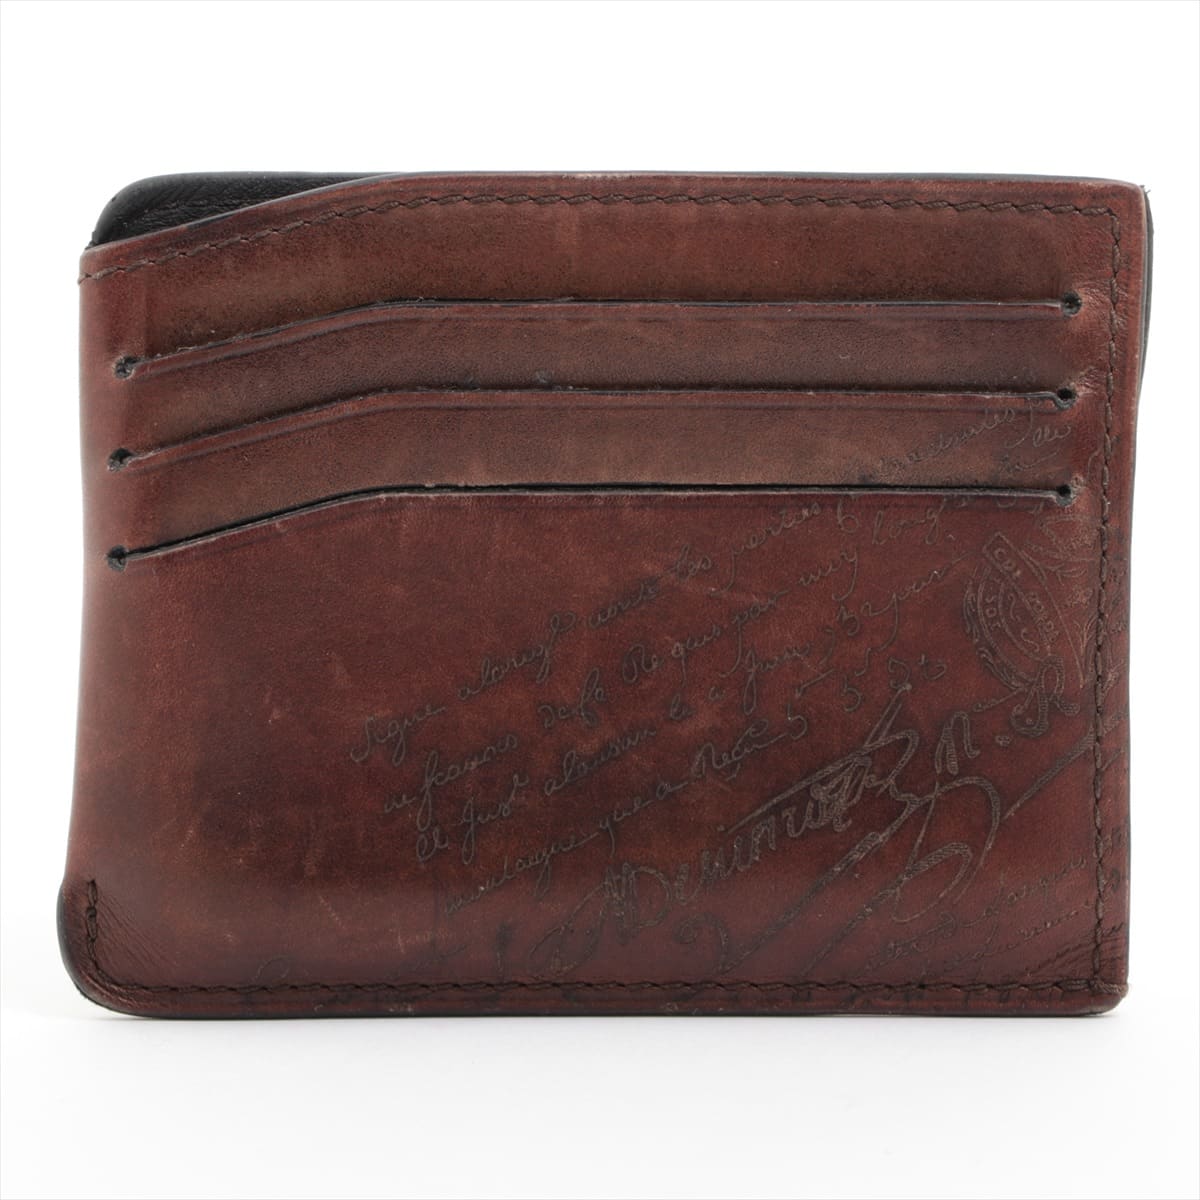 Berluti Calligraphy Leather Pass Holder Brown